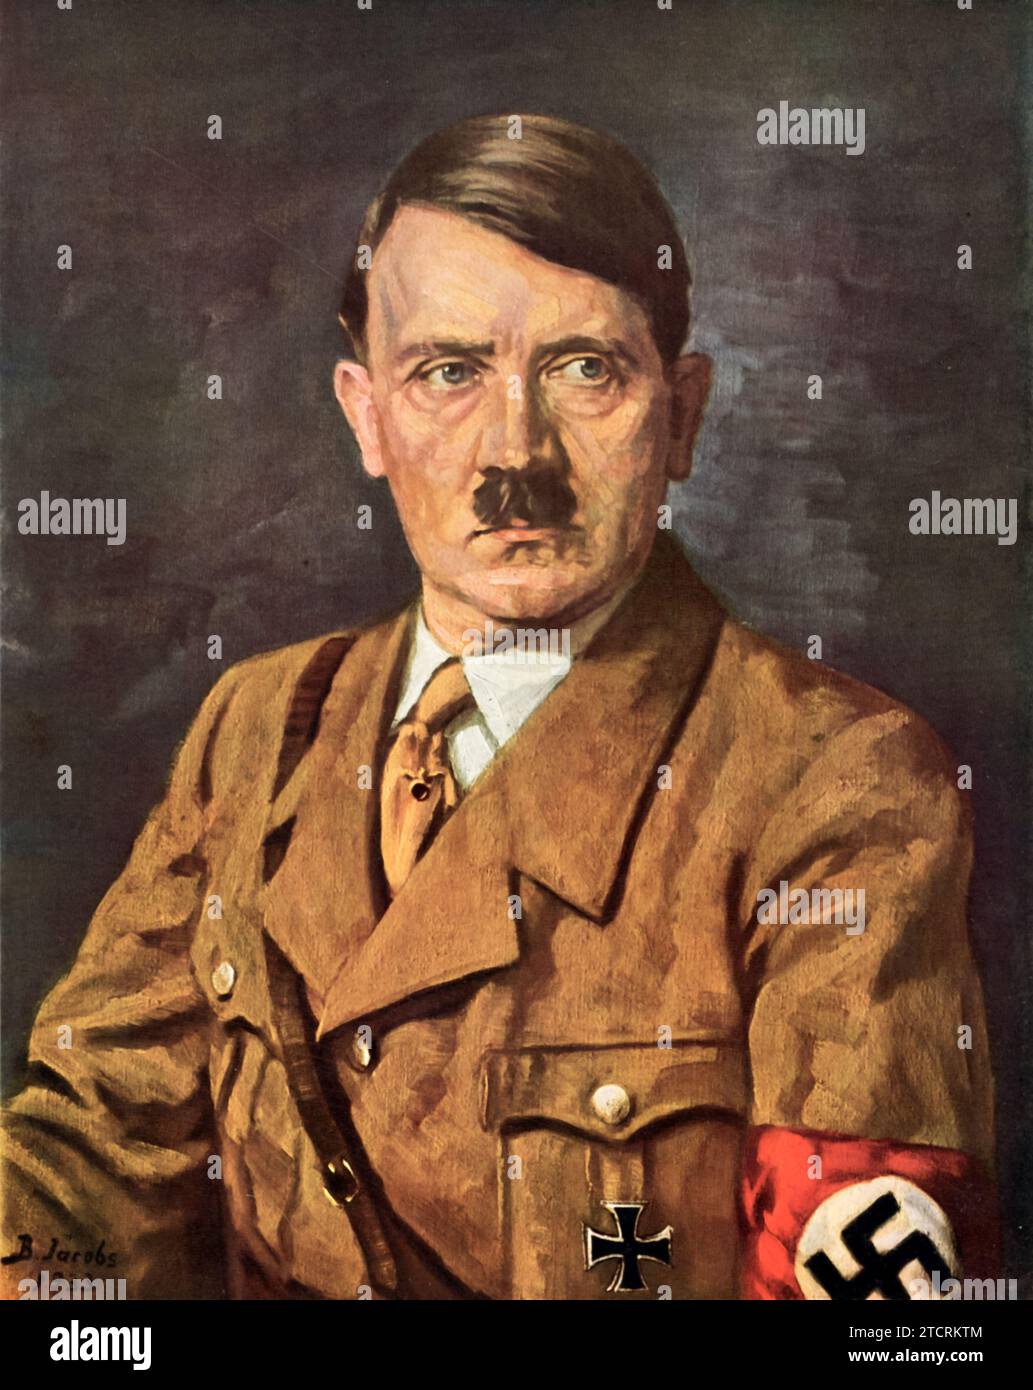 Portrait of Adolf Hitler, German leader, painted in 1933 by B Von Jacobs. This colored painting depicts Hitler during a significant period, just as he rose to power in Germany. The artwork captures the historical figure in a formal pose, reflecting the art style and portraiture techniques of the early 1930s. Stock Photo